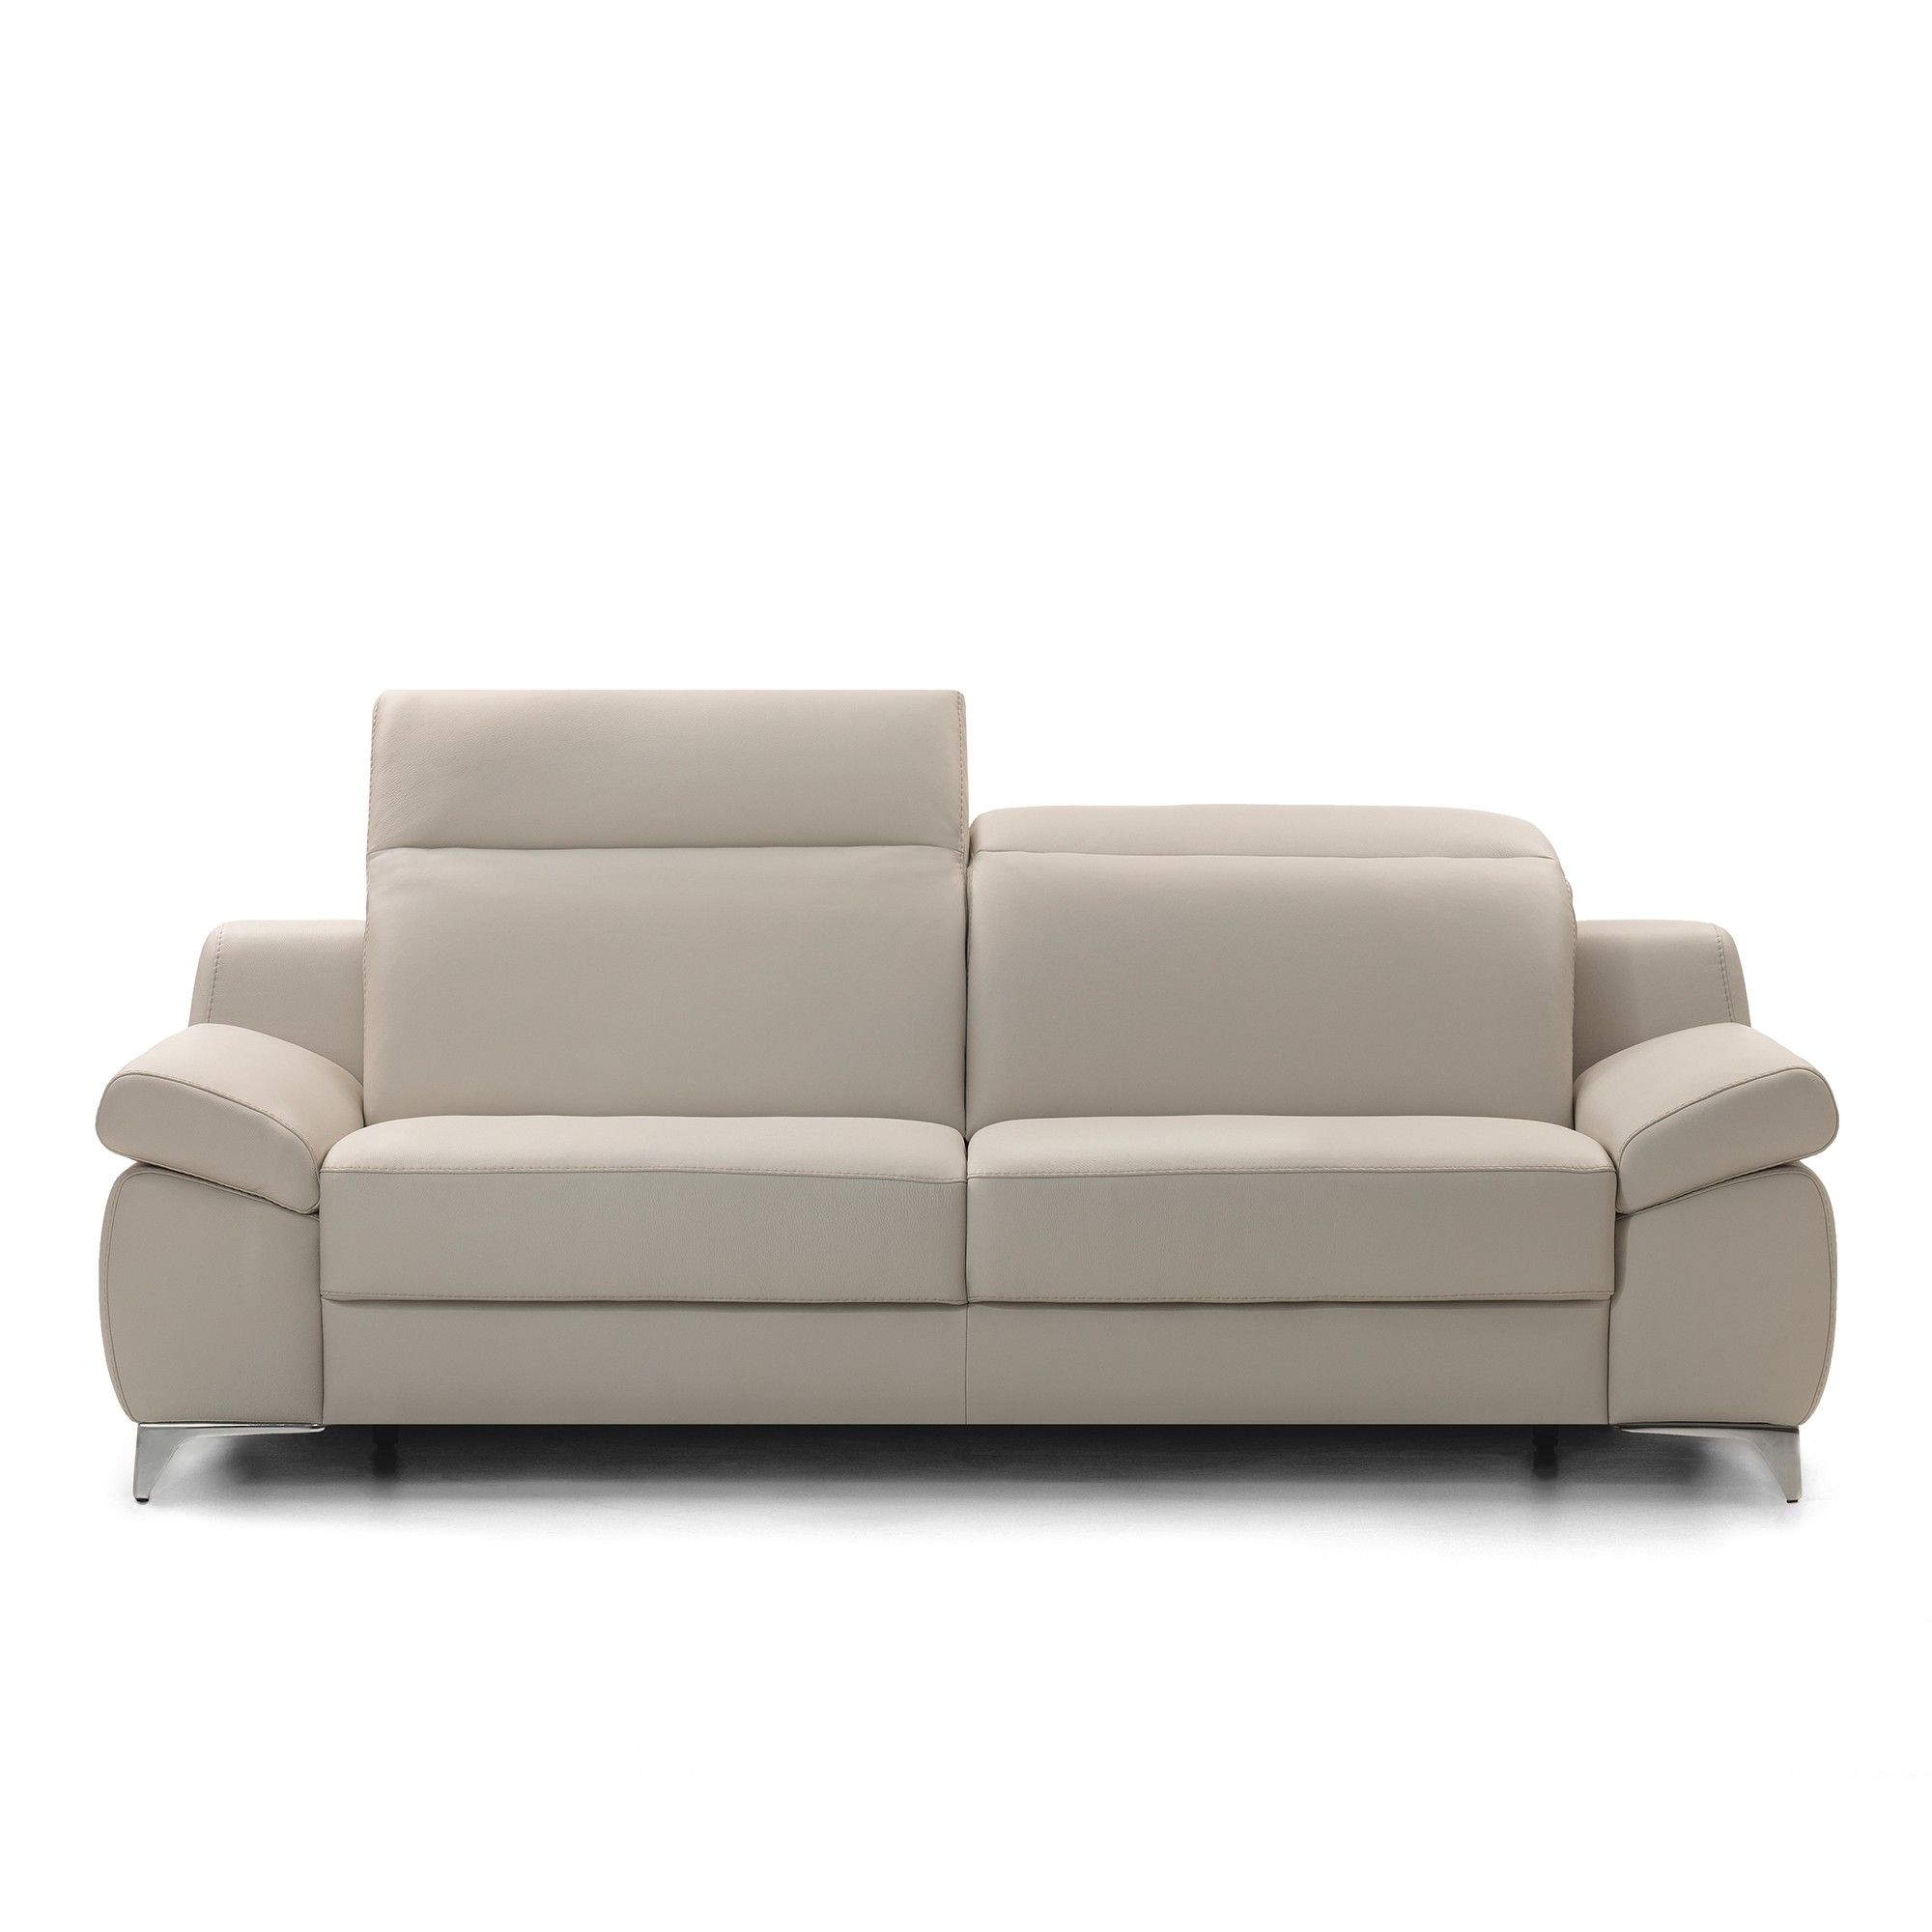 Rom Wren Power Recliner Sofa Large – Recliner Sofas – Cookes Furniture With Recliner Sofas (Photo 3 of 10)